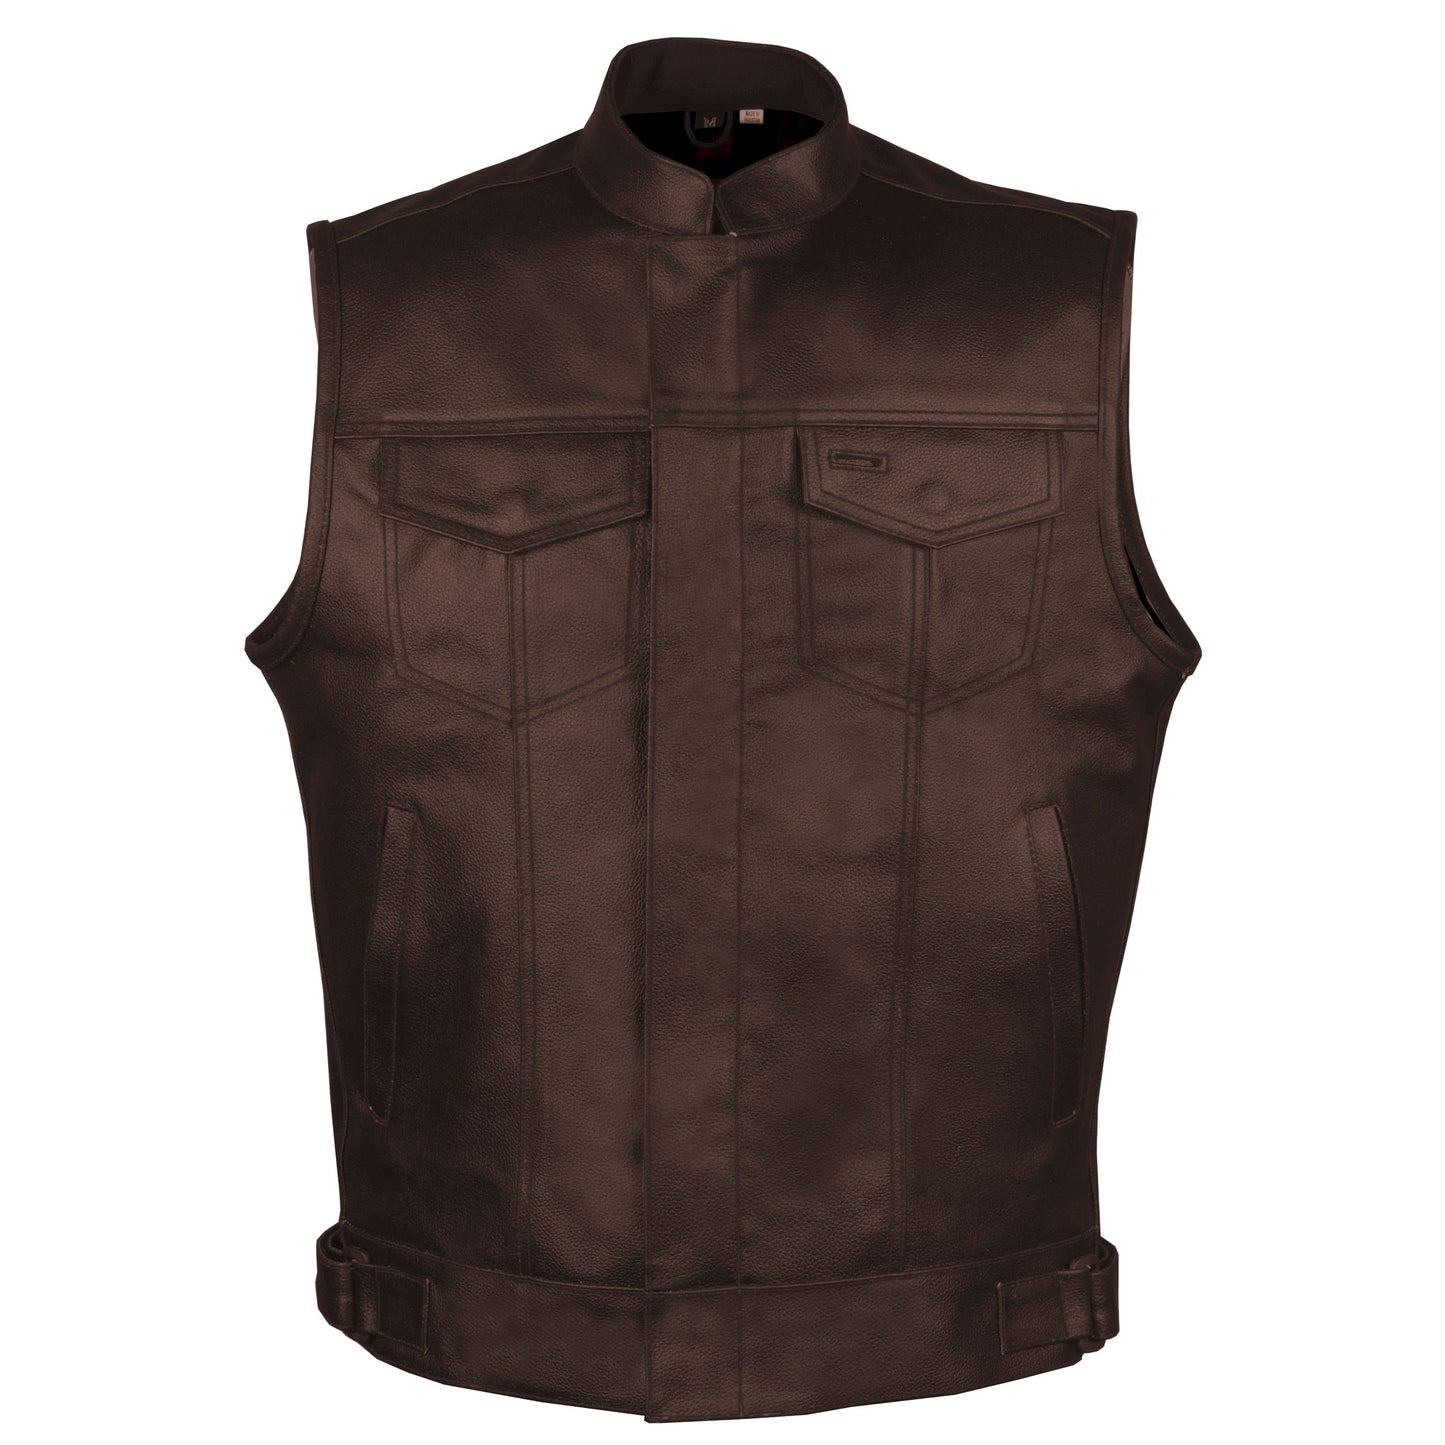 Men's ARMOR Leather SOA Anarchy Motorcycle Biker Club Concealed Carry Vest Coffee Brown